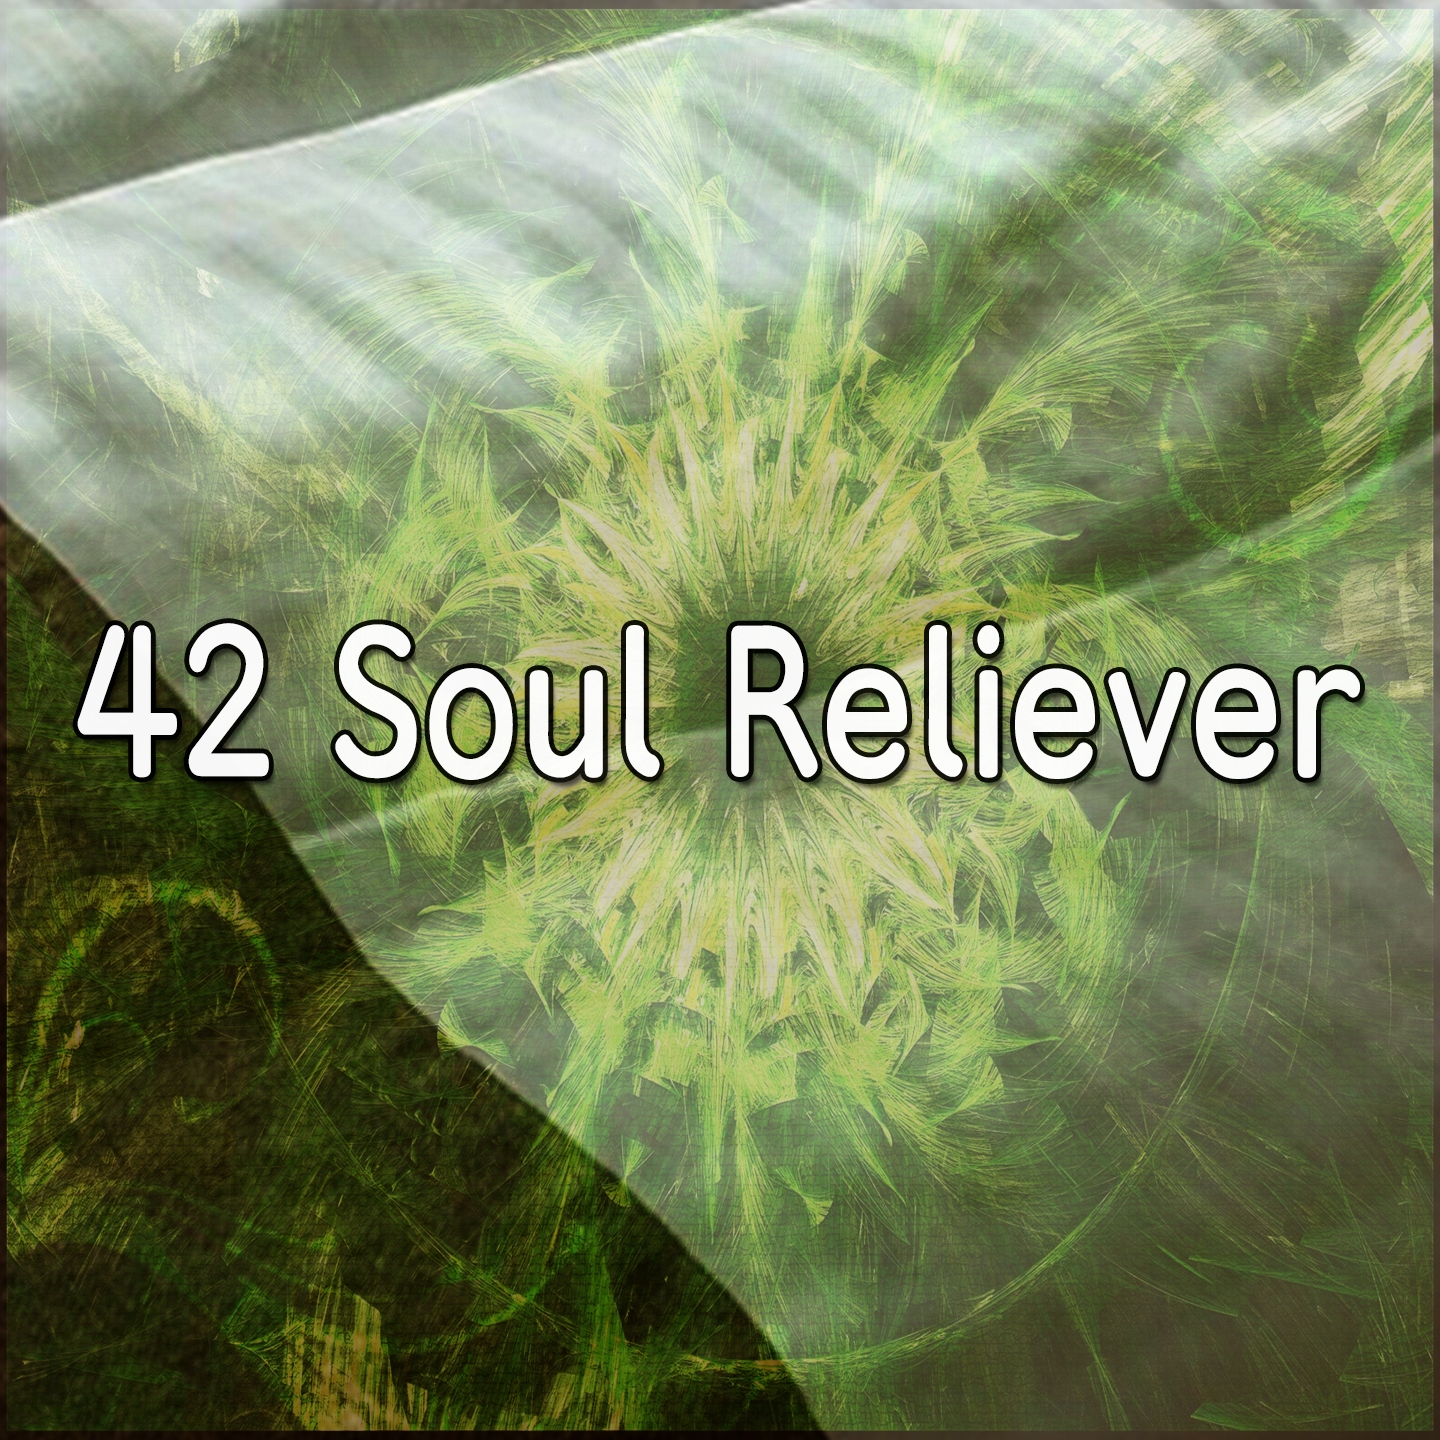 42 Soul Reliever